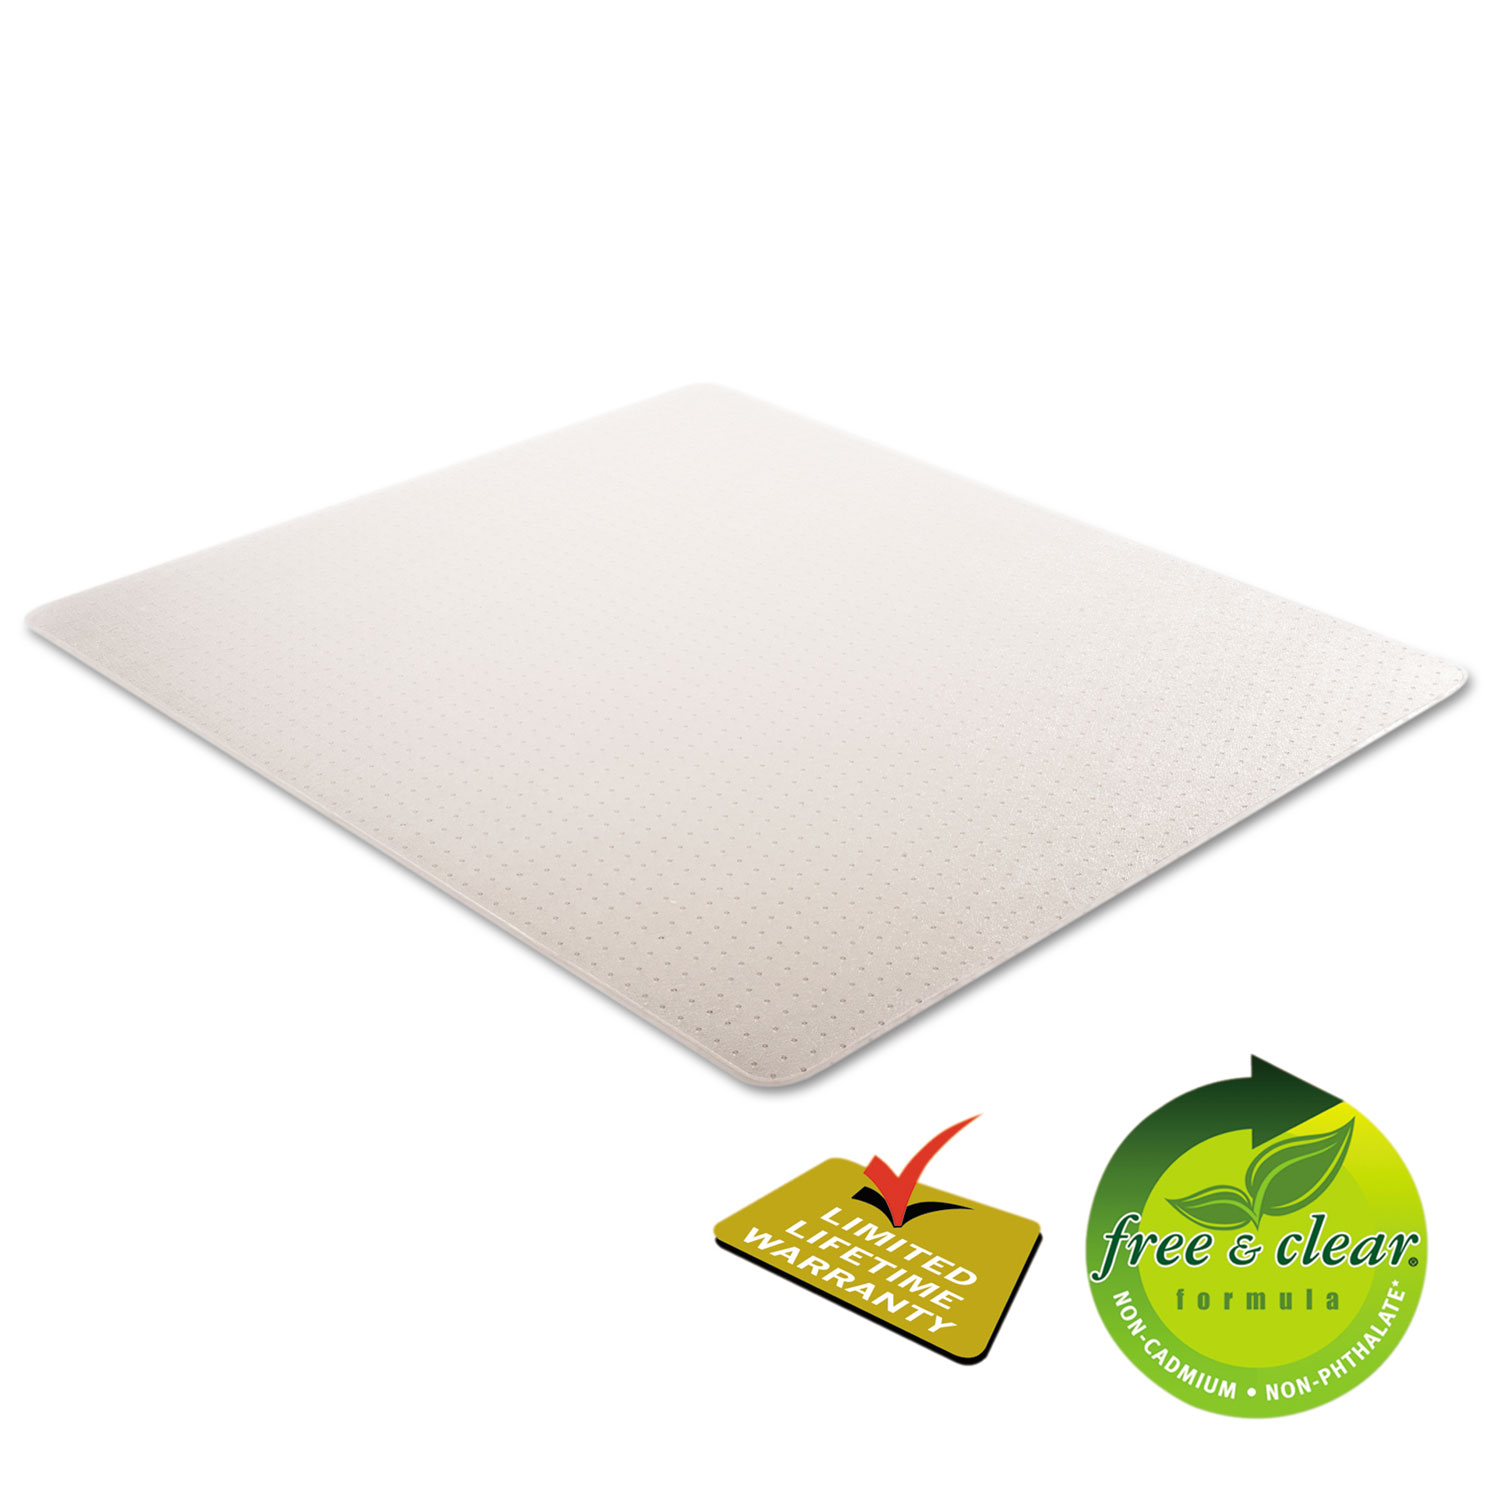 DuraMat Moderate Use Chair Mat for Low Pile Carpet, Beveled, 46 x 60, Clear